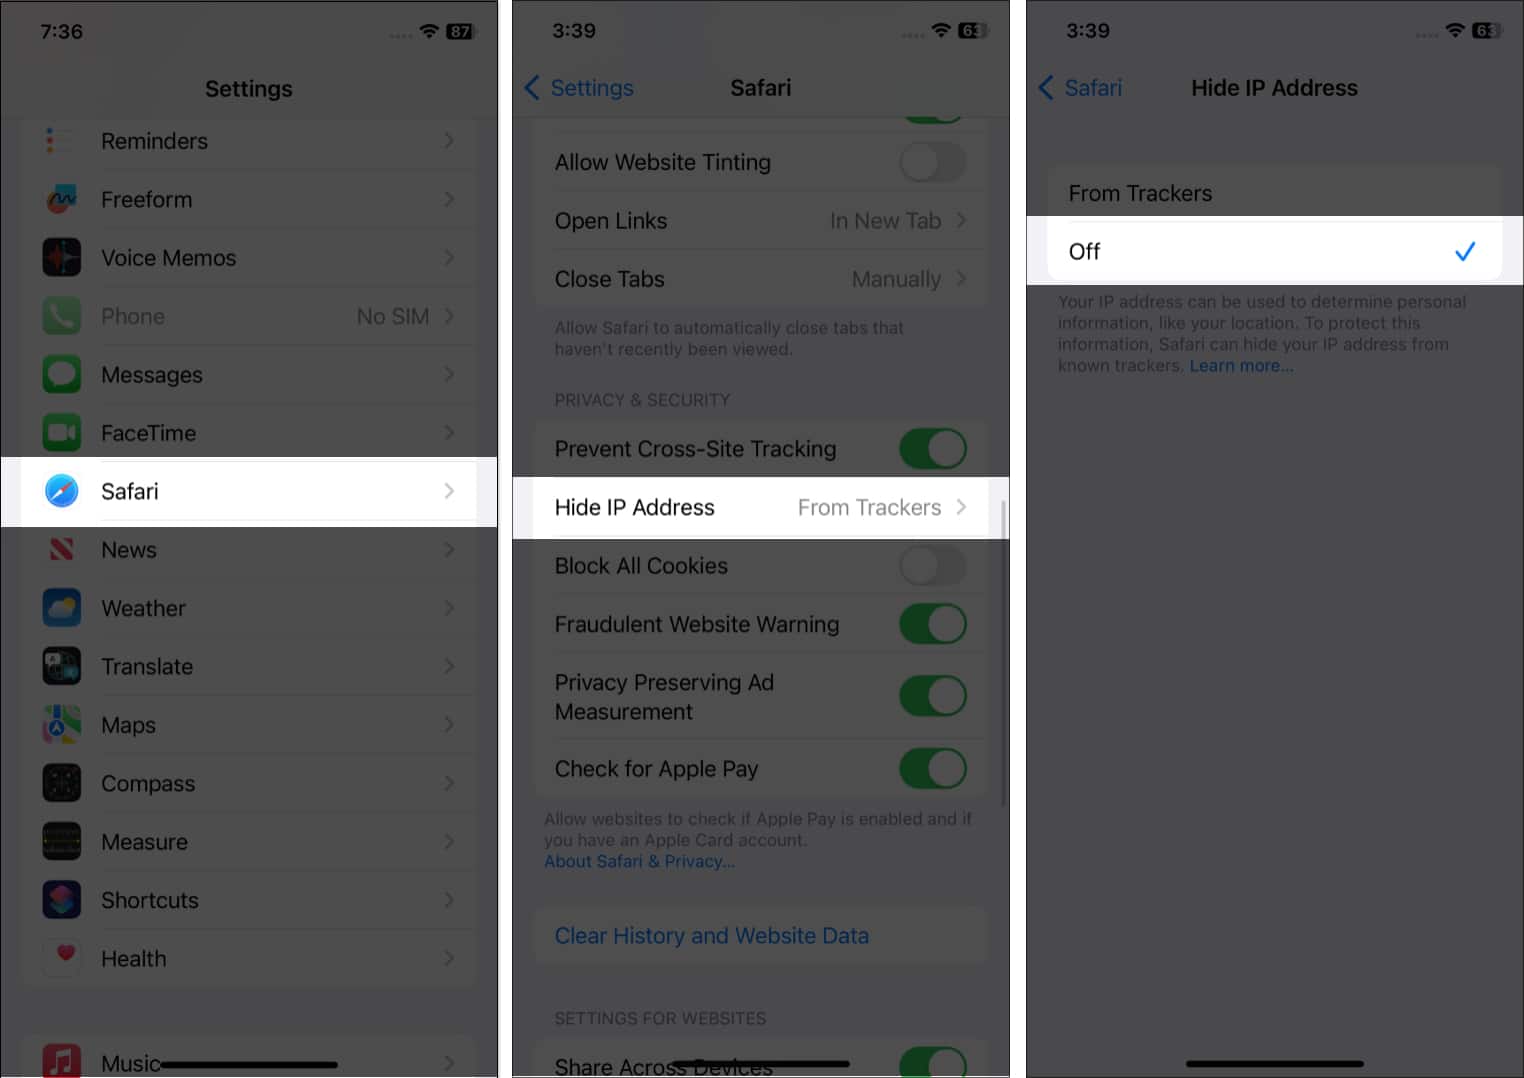 Disable Hide IP address from Trackers on iPhone